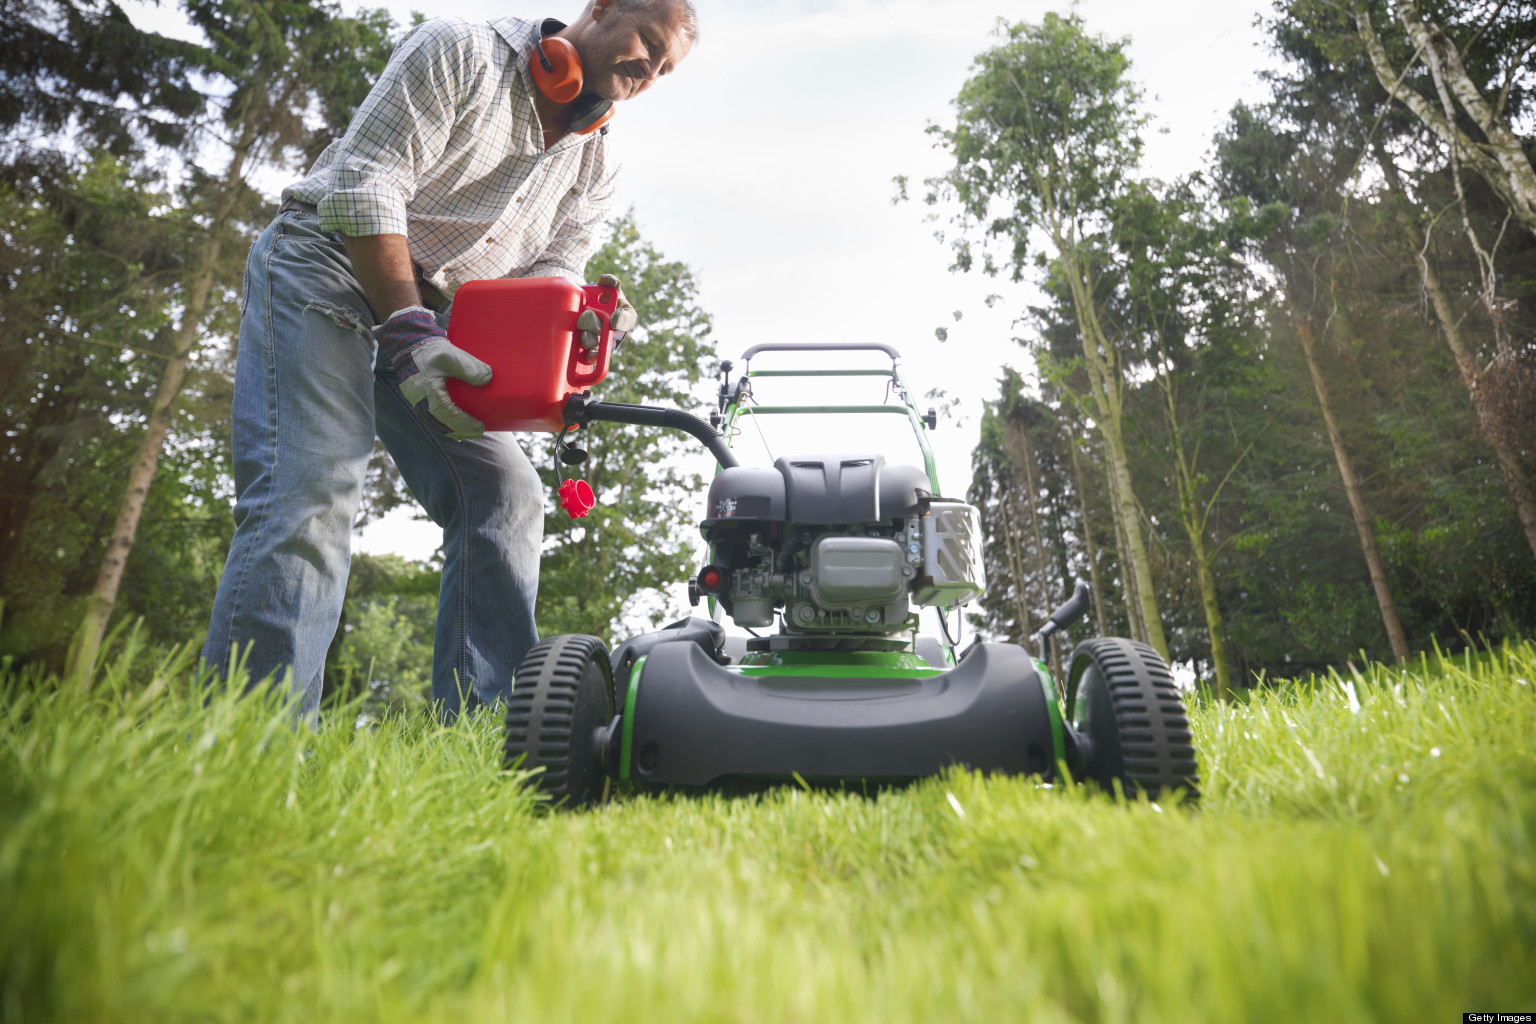 What is a good lawn mower for women?